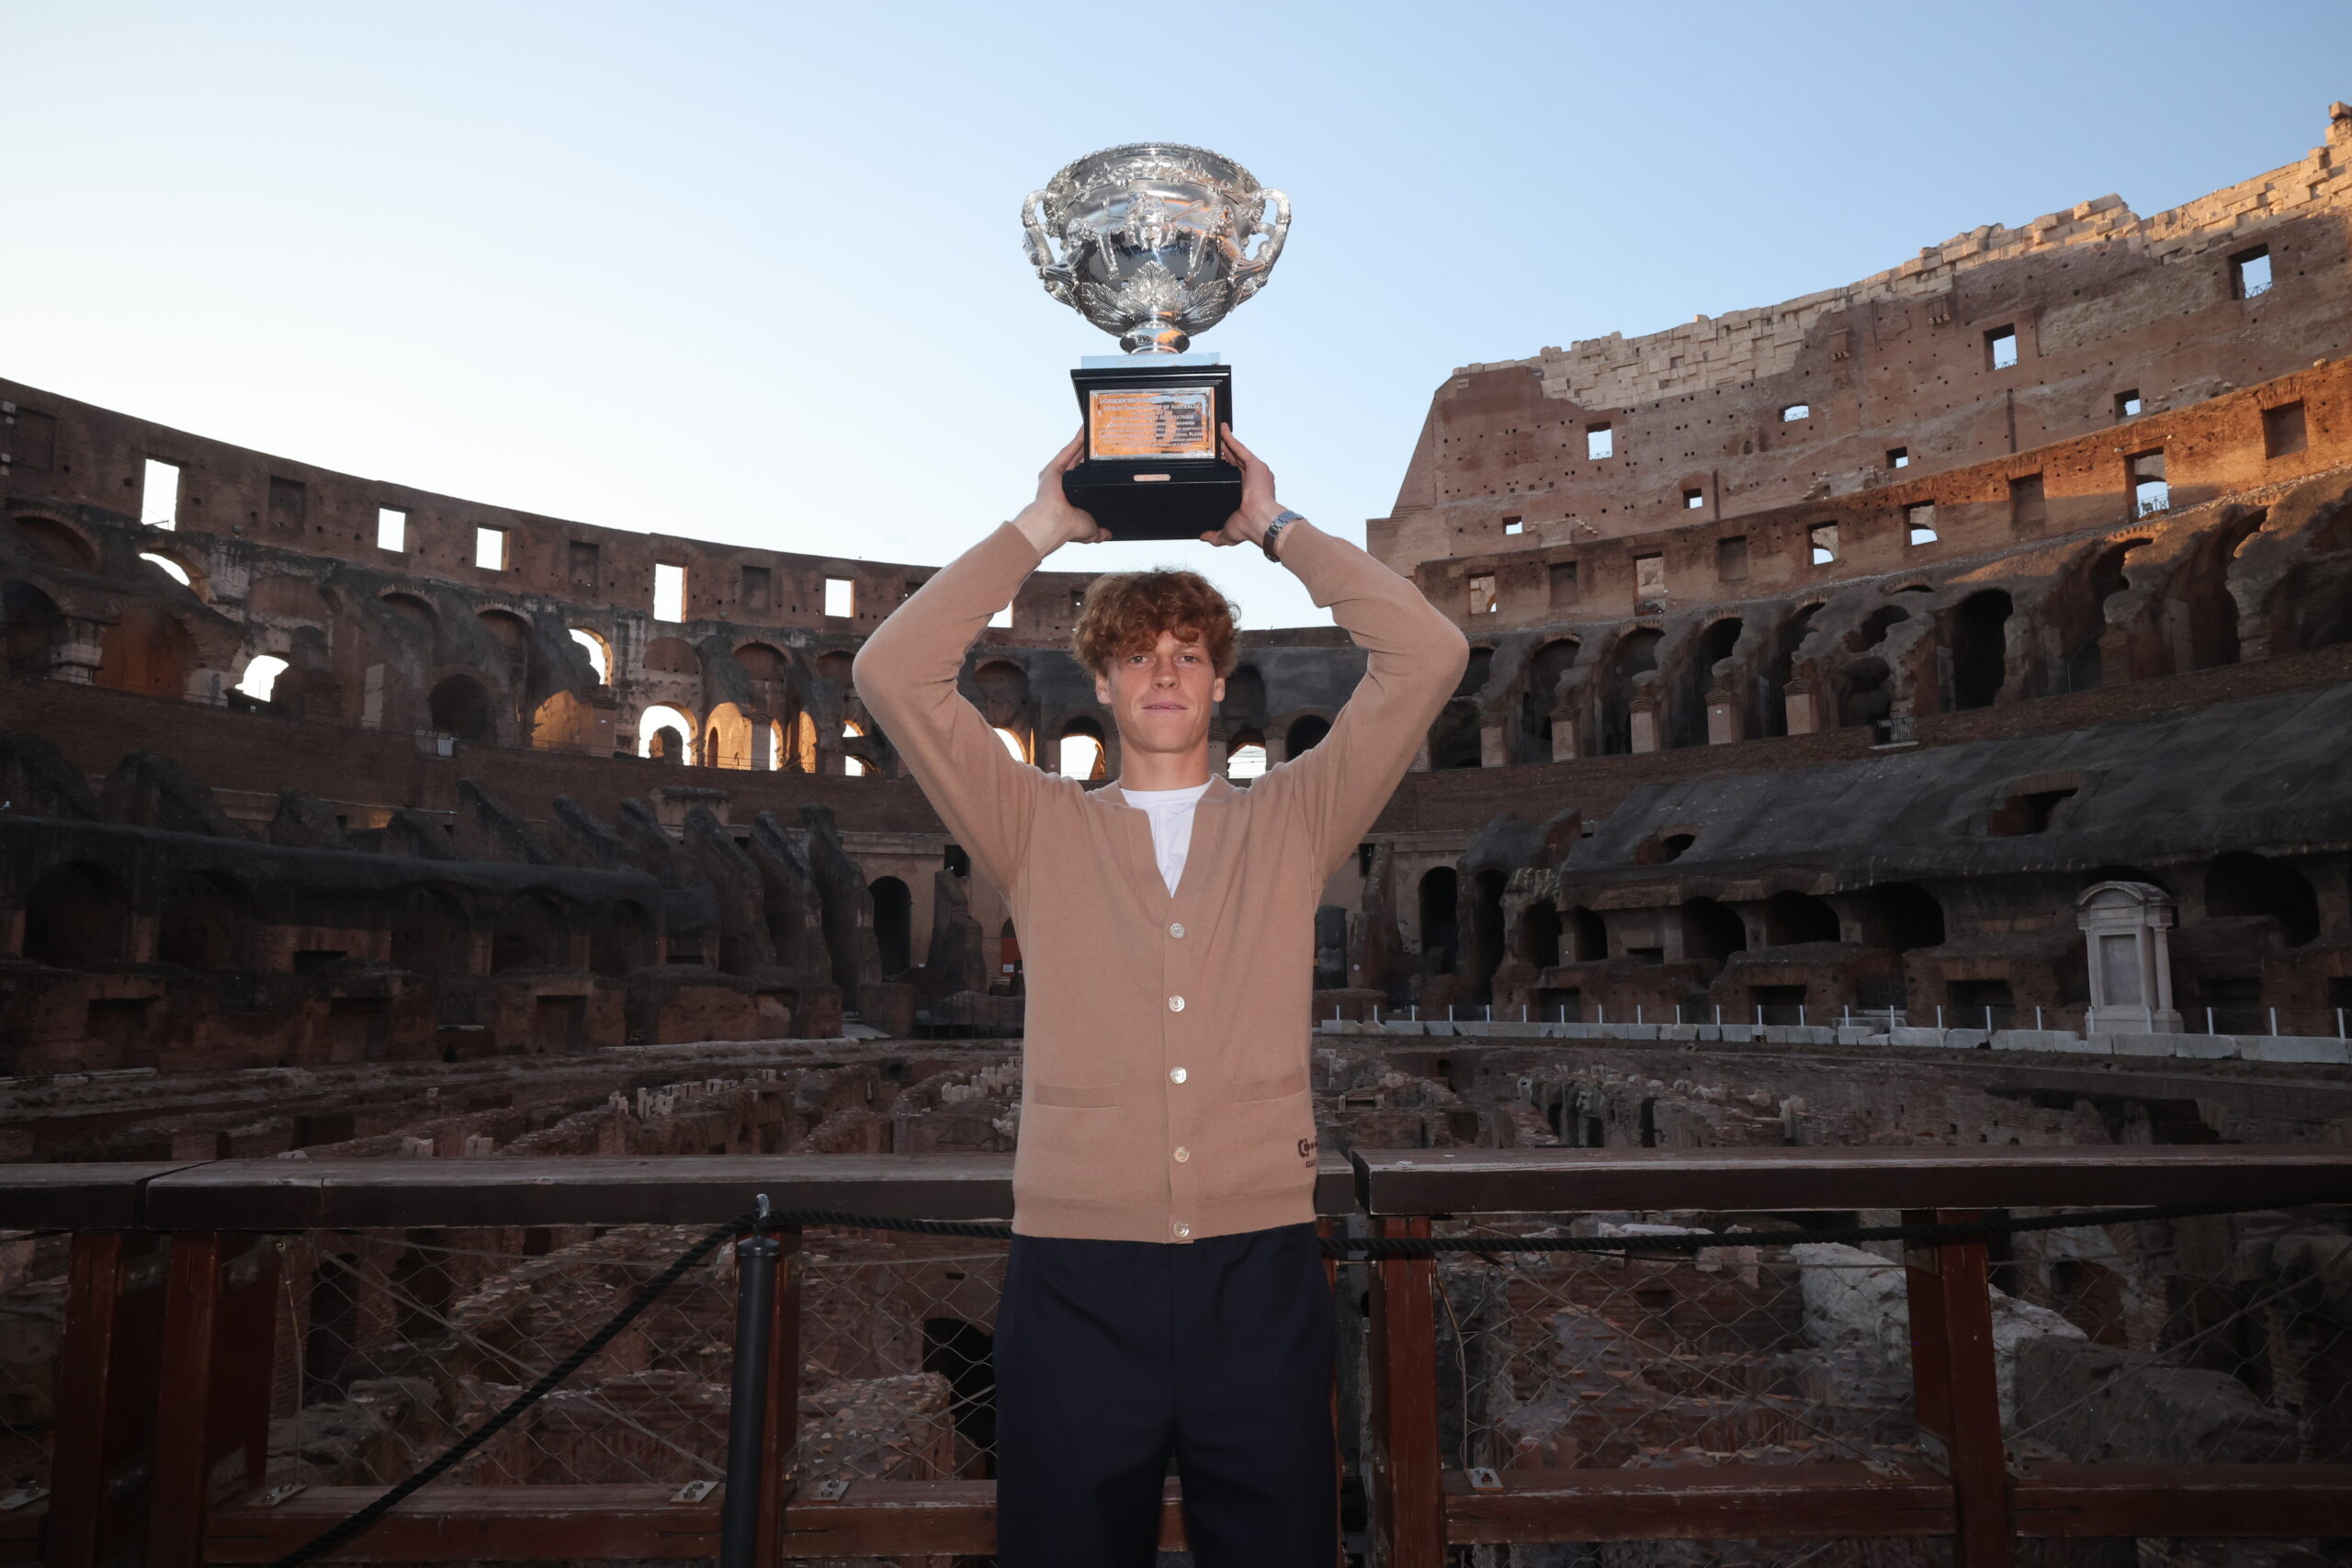 Tennis champion Jannik Sinner holds the Norman Brookes Challenge Cup aloft at the historic Colosseum in Rome, wearing a Gucci cashmere cardigan, celebrating his victory with classical grandeur in the background.